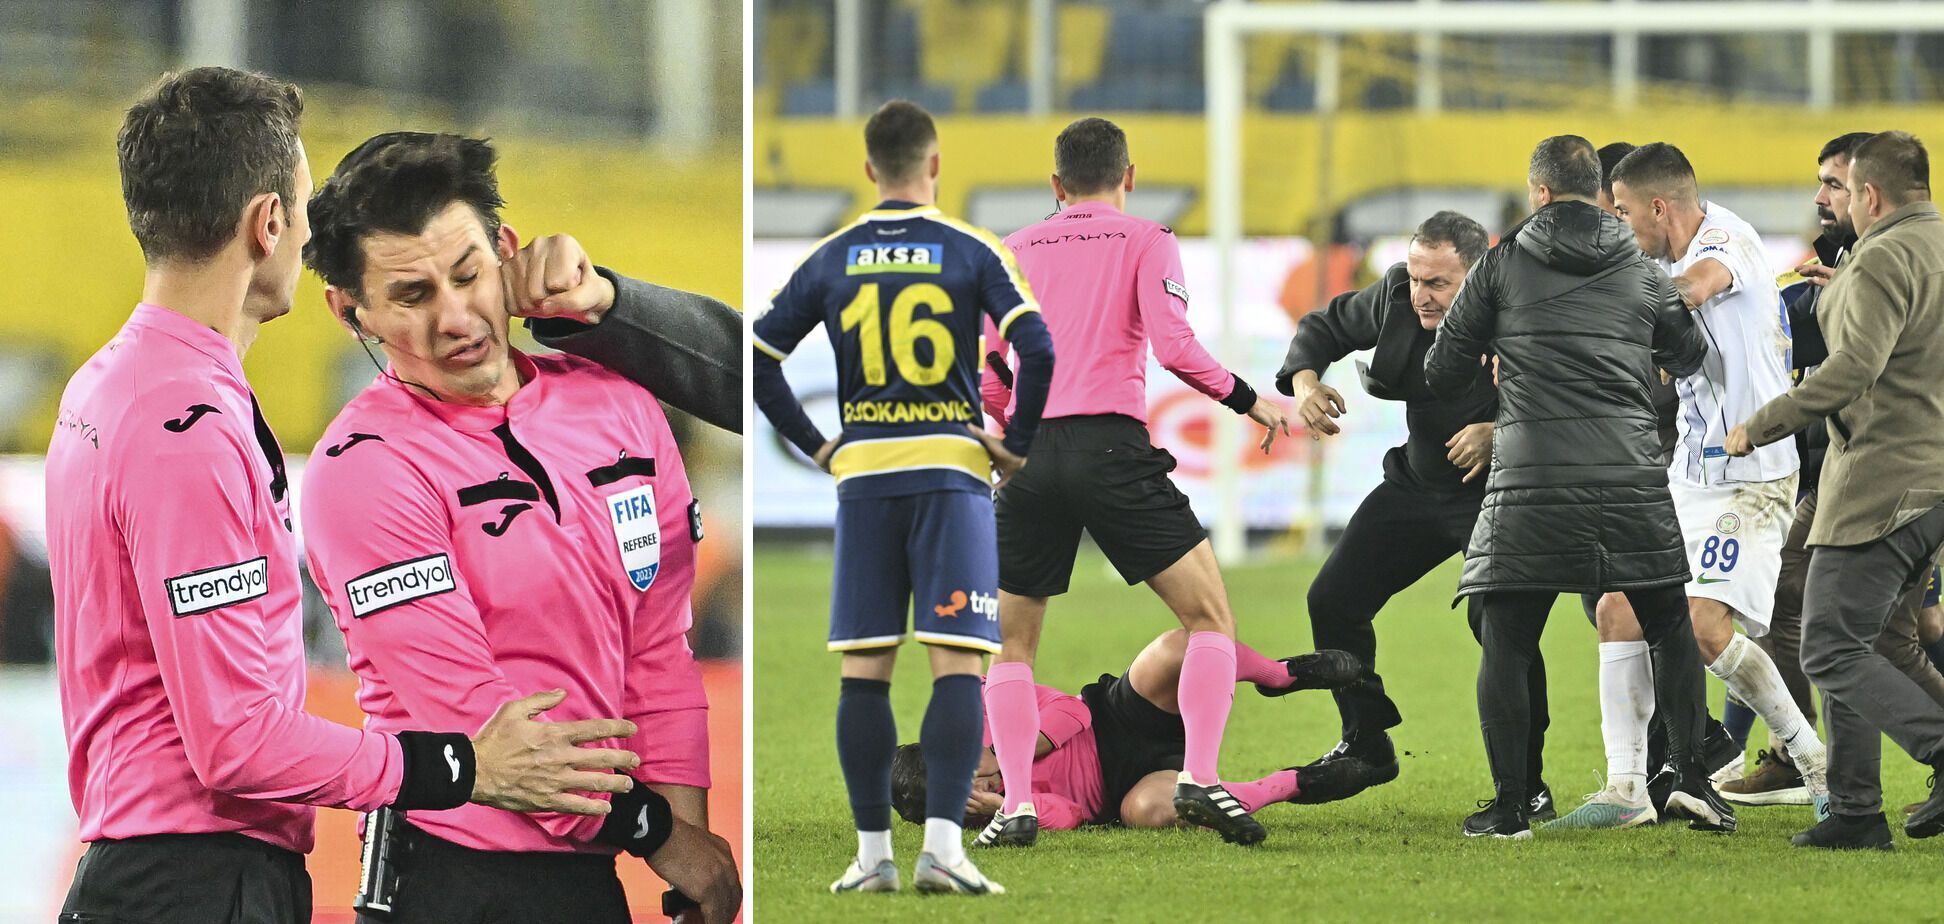 New scandal in Turkey. The club president got upset about a goal and took the players off the field